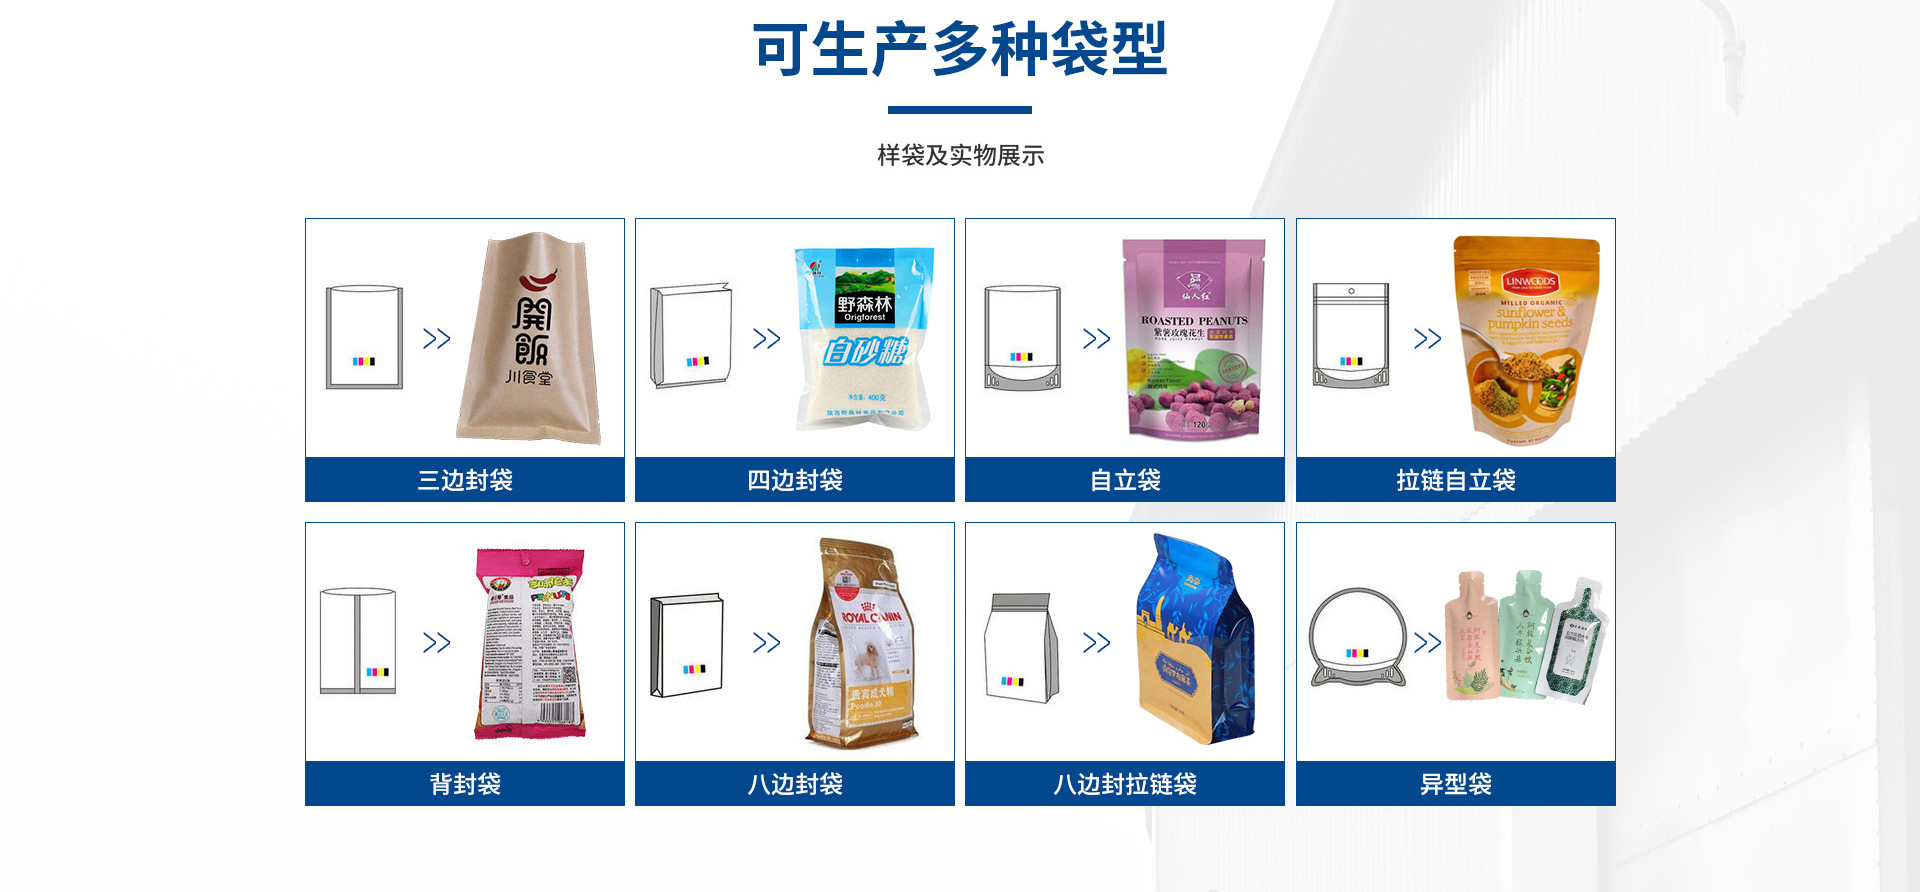 Fully automatic hot pot base material packaging machine, self-supporting bag filling paste liquid filling machine, feeding bag type sauce feeding bag machine